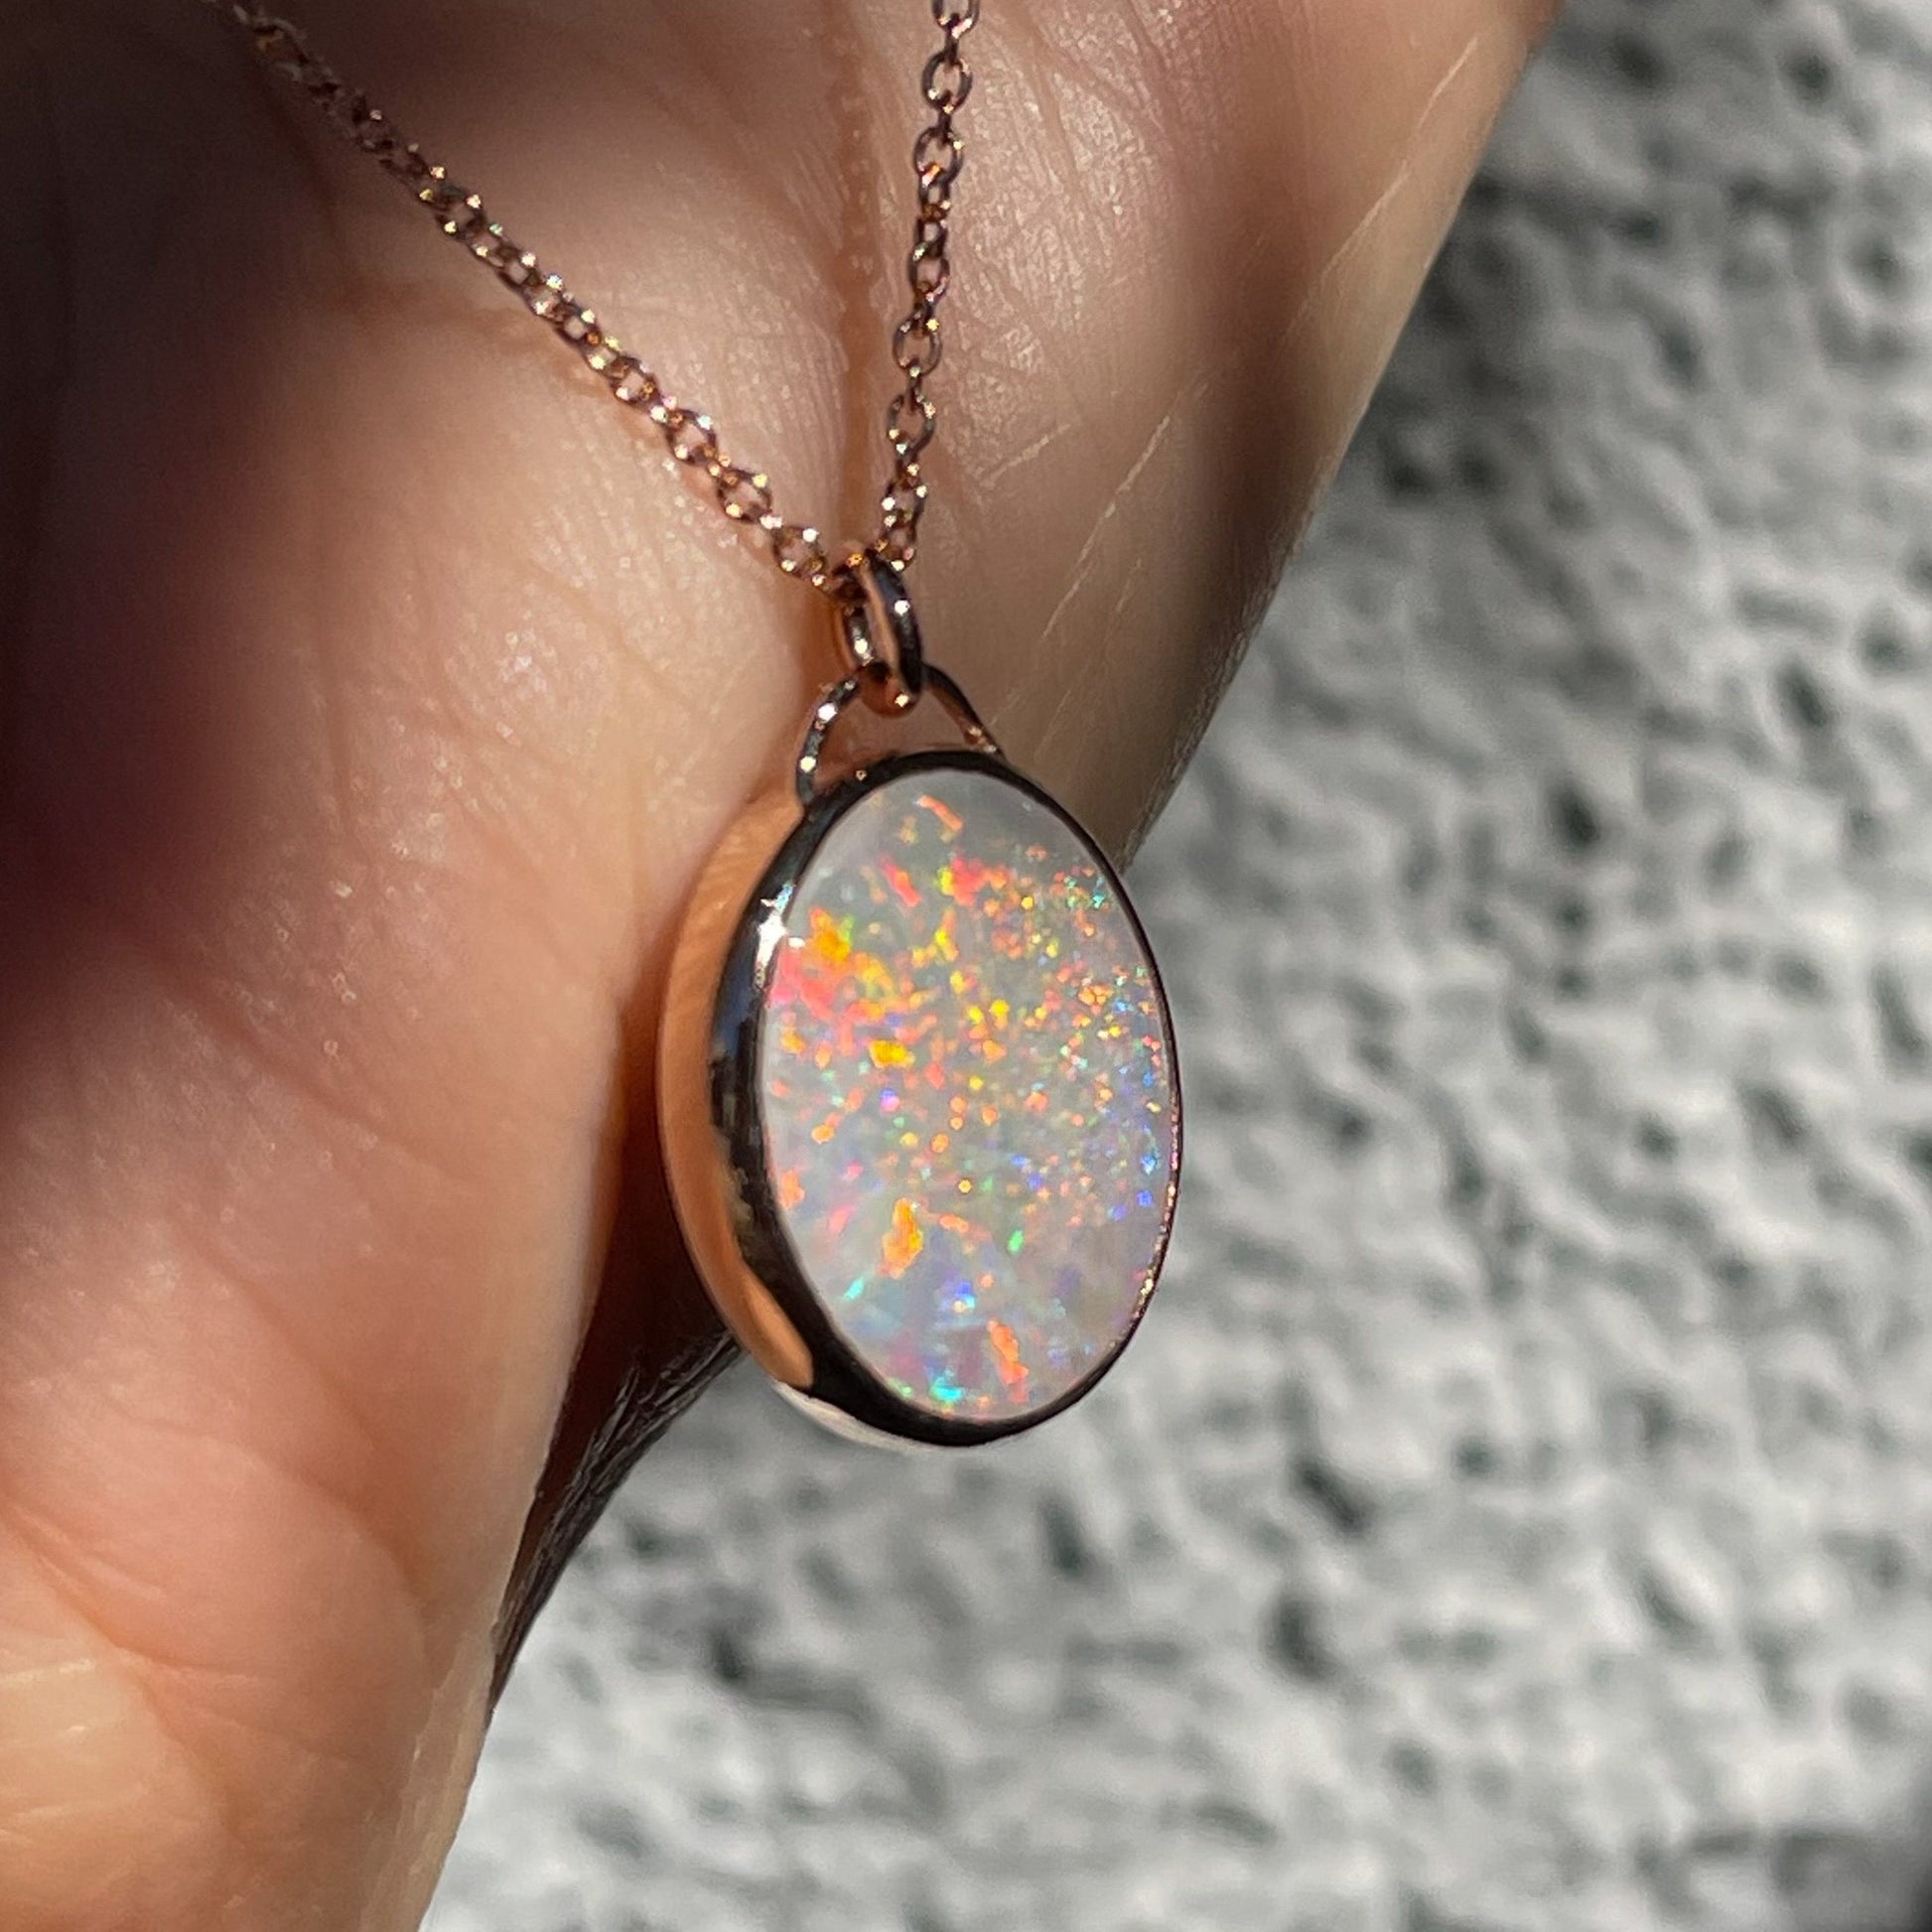 Angled shot of an Australian Opal Necklace by NIXIN Jewelry showing the side of the rose gold bezel setting. The opal pendant is resting against a hand.